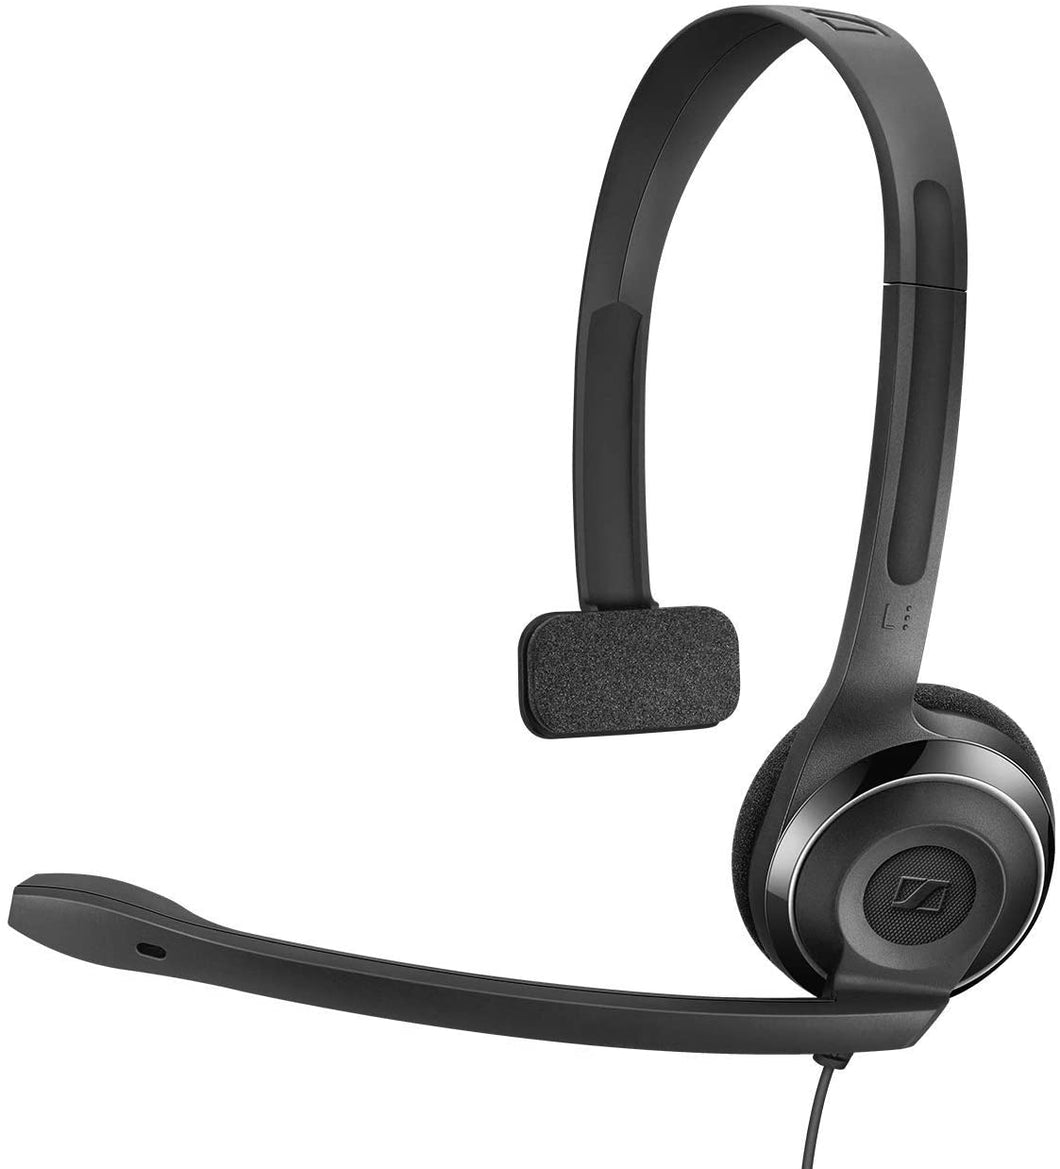 USB Headset with Microphone